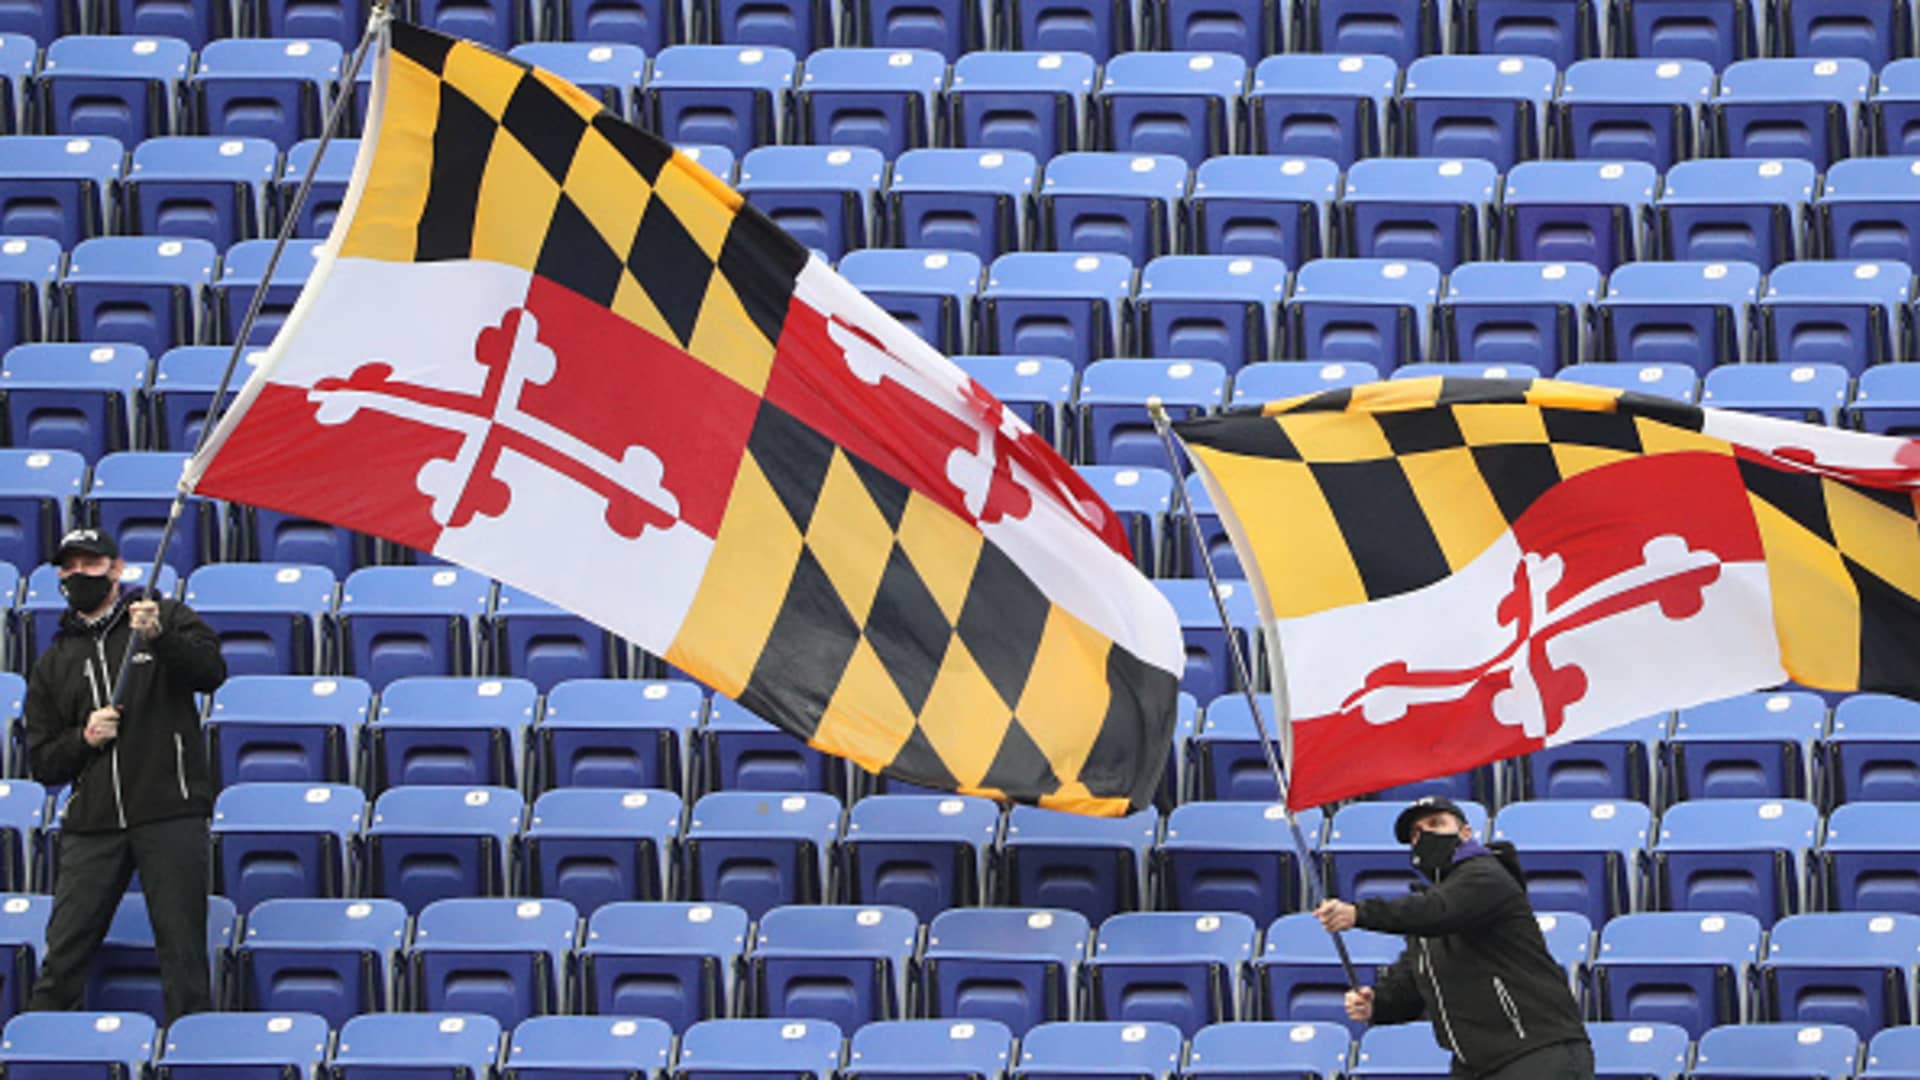 Baltimore Ravens employees wave Maryland flags in the stands at M&T Bank Stadium on November 01, 2020 in Baltimore, Maryland.